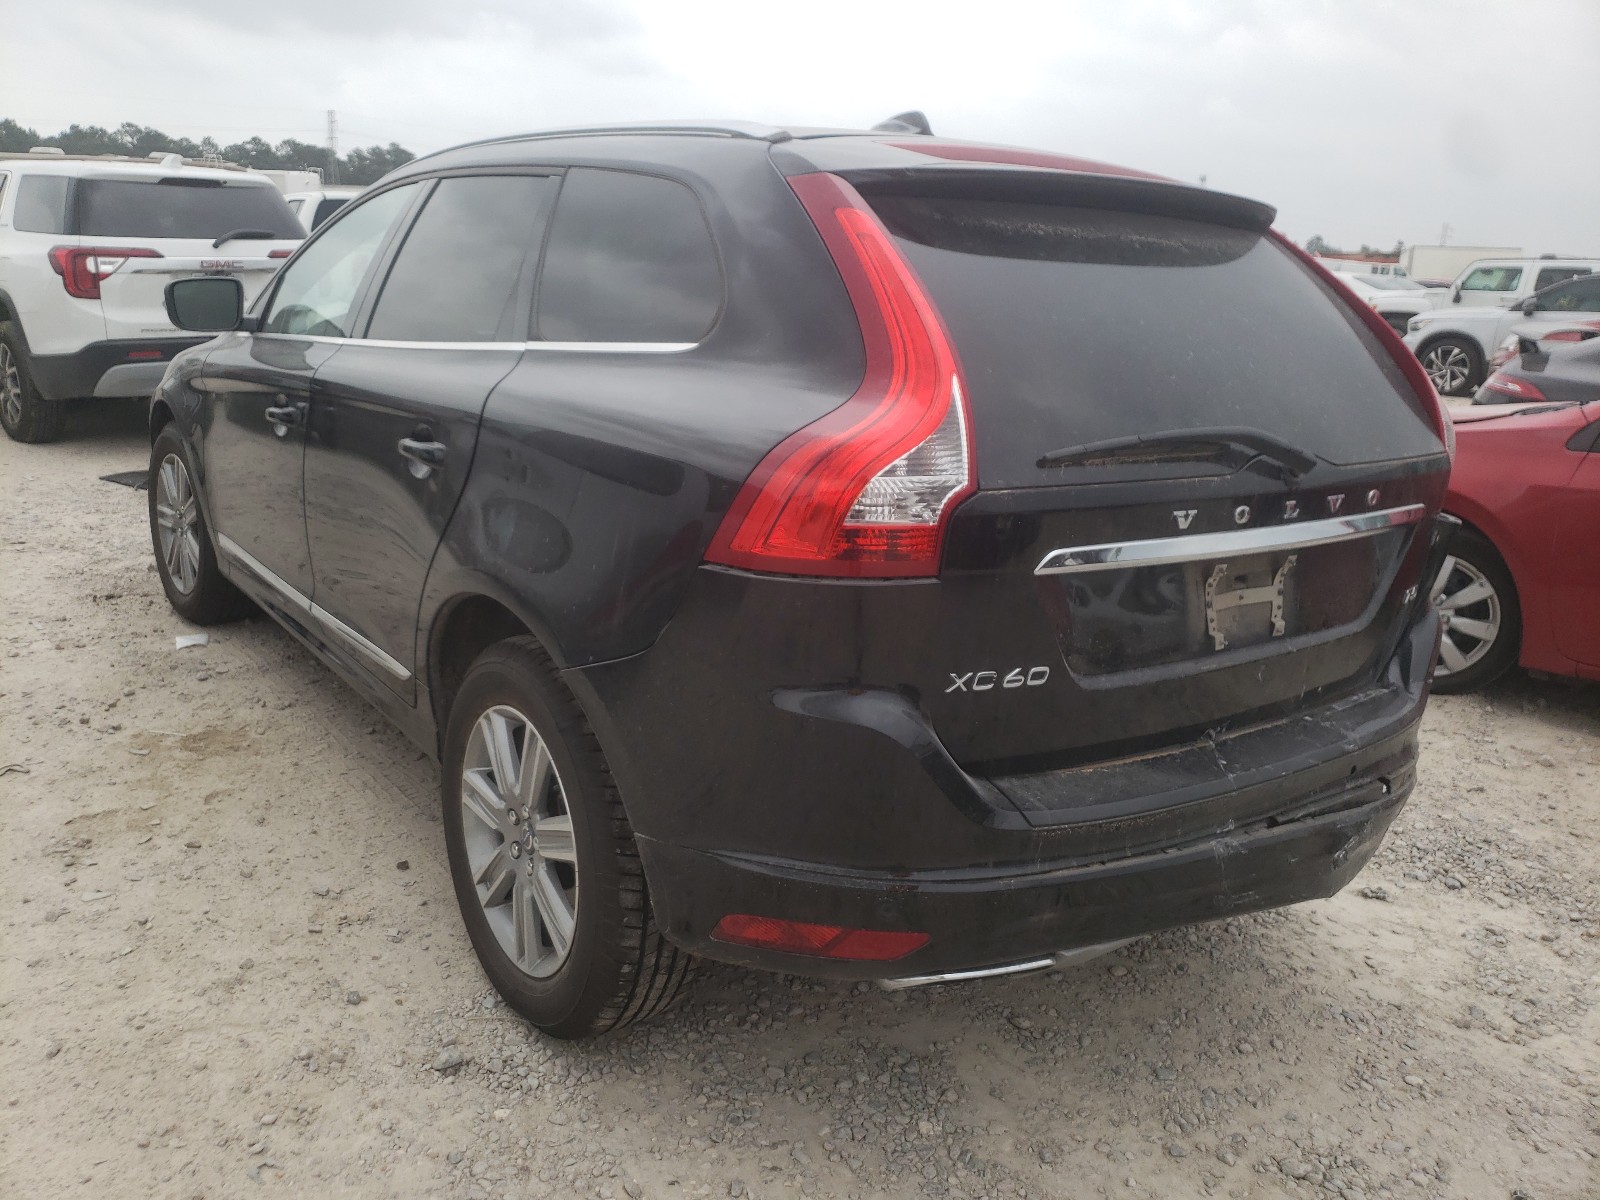 Volvo Xc60 t5 in 2017